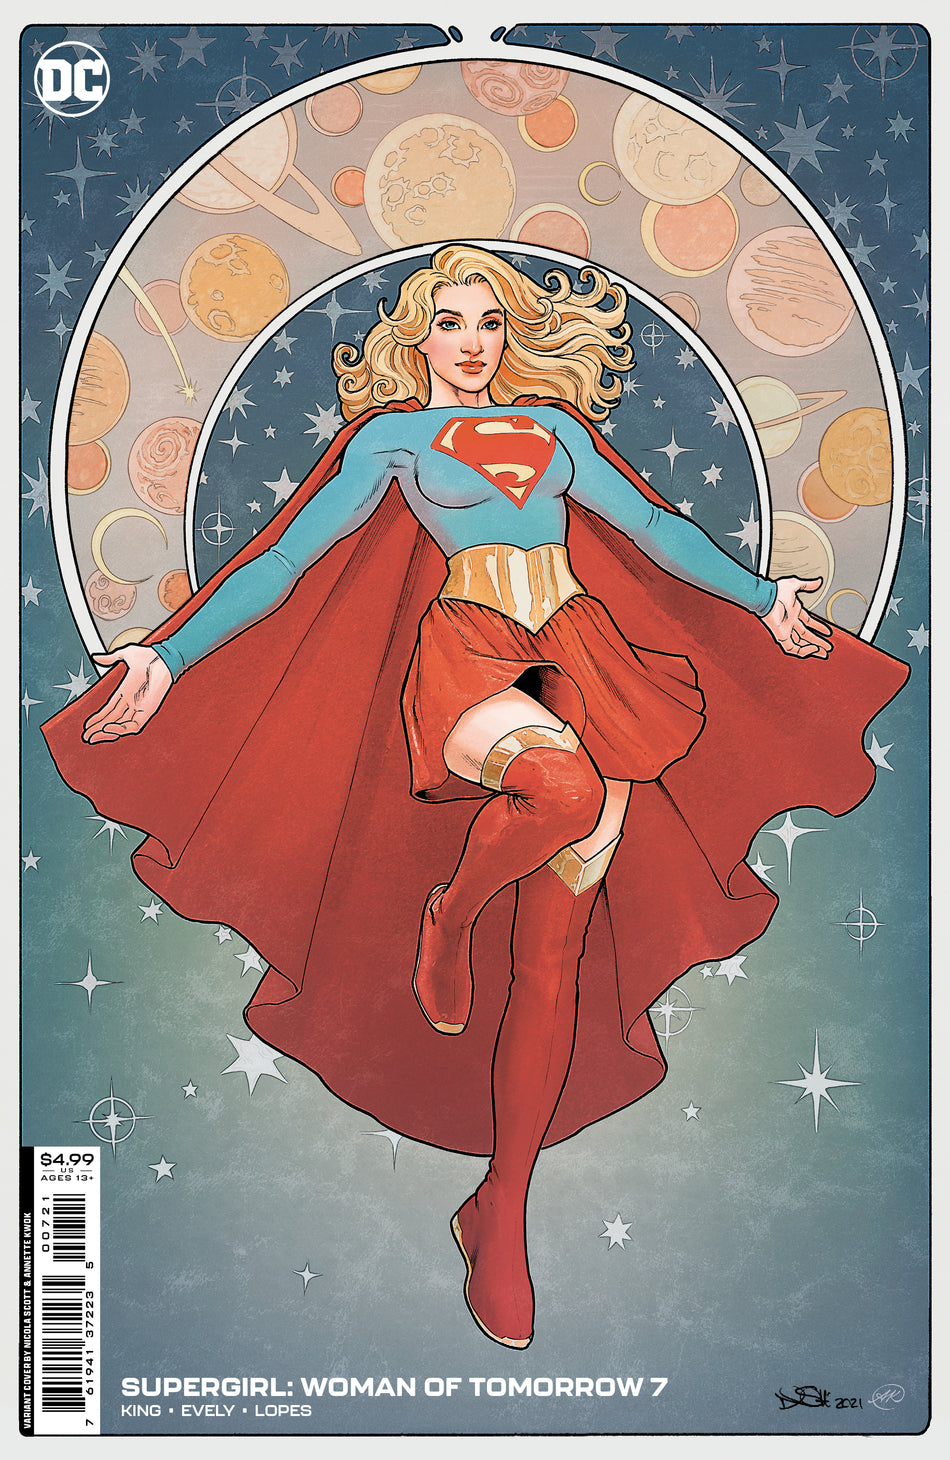 Photo of Supergirl: Woman of Tomorrow (22) 7B  Nicola Scott   Nicola Scott   comic sold by Stronghold Collectibles